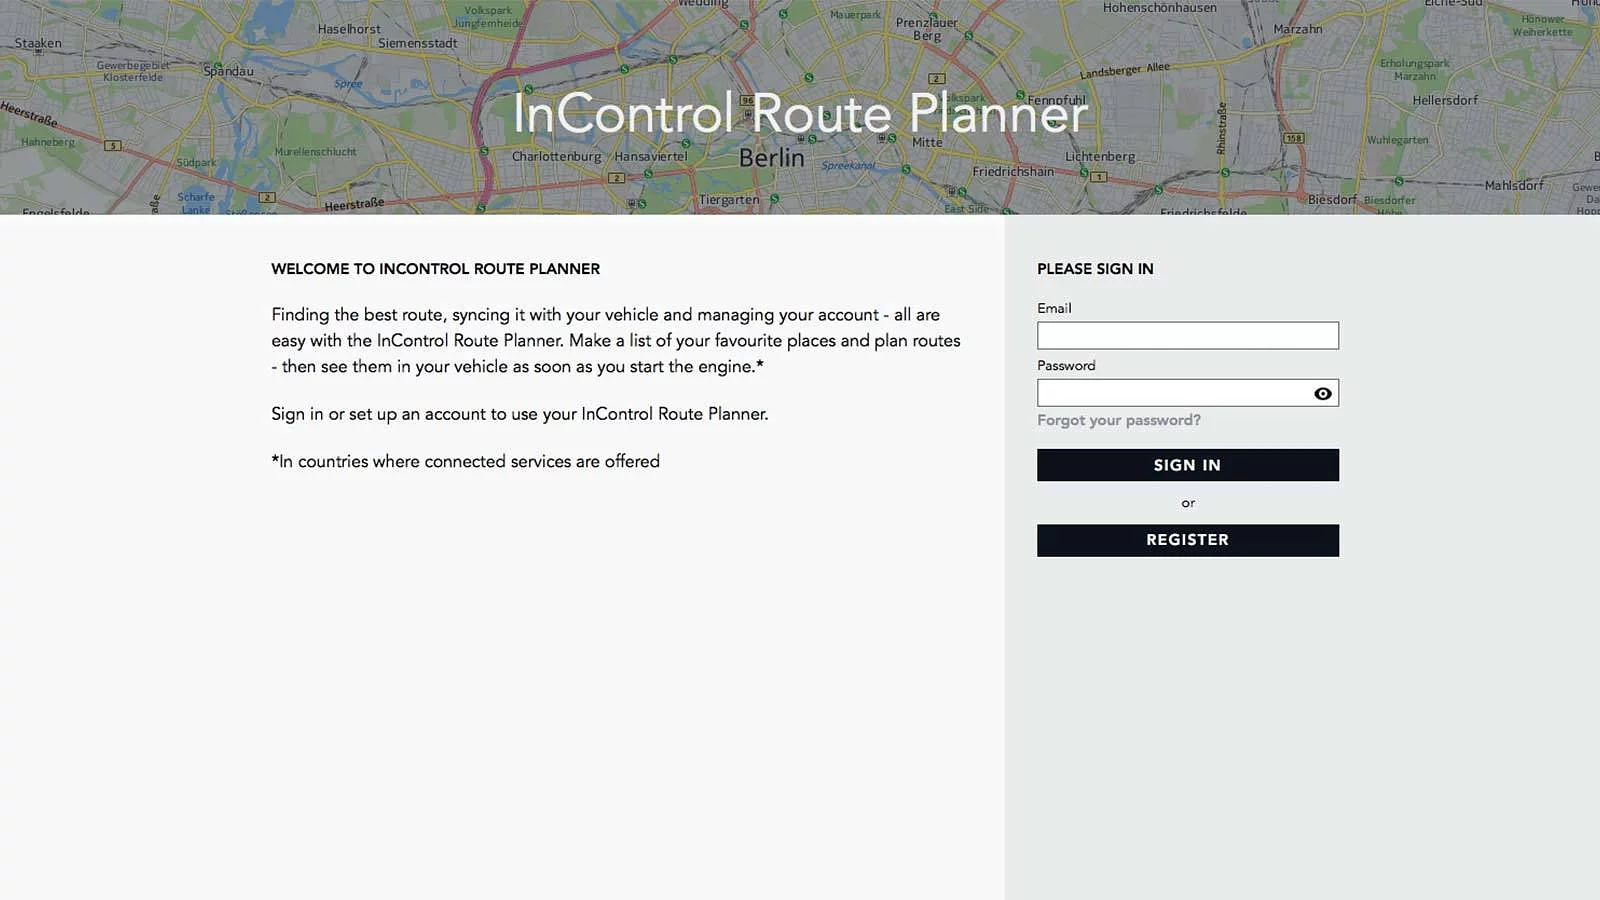 TRUY CẬP INCONTROL ROUTE PLANNER